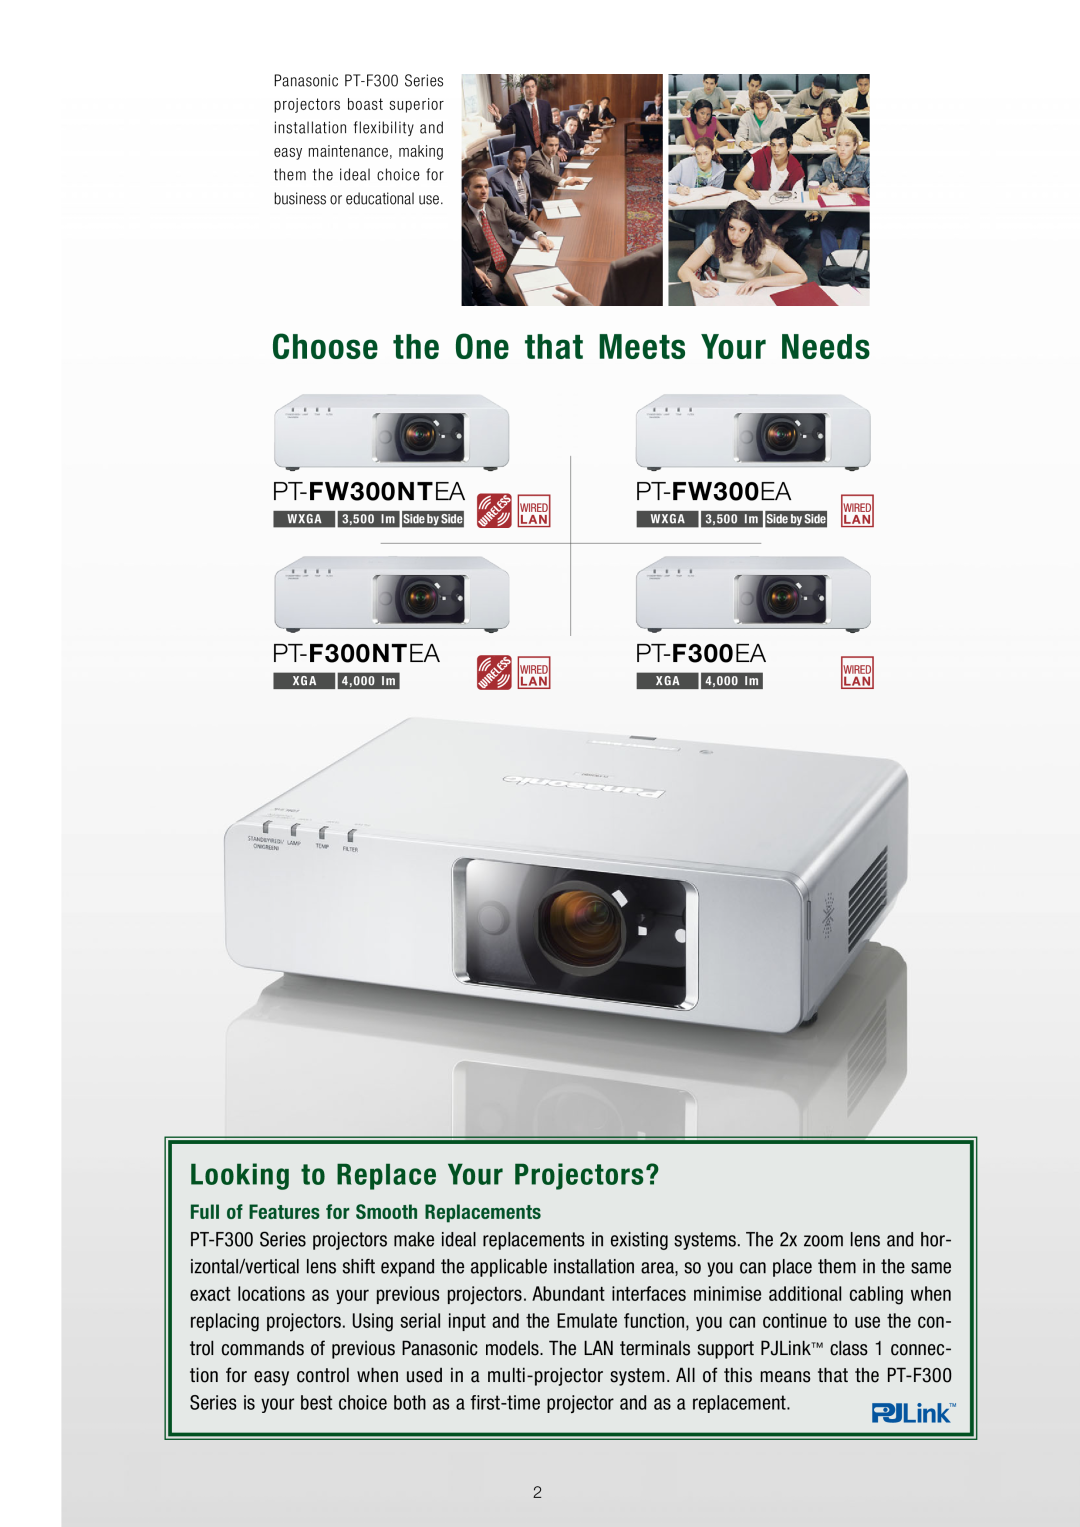 Panasonic PT-F200 Series manual Choose the One that Meets Your Needs, Looking to Replace Your Projectors?, PT-FW300NTEA 